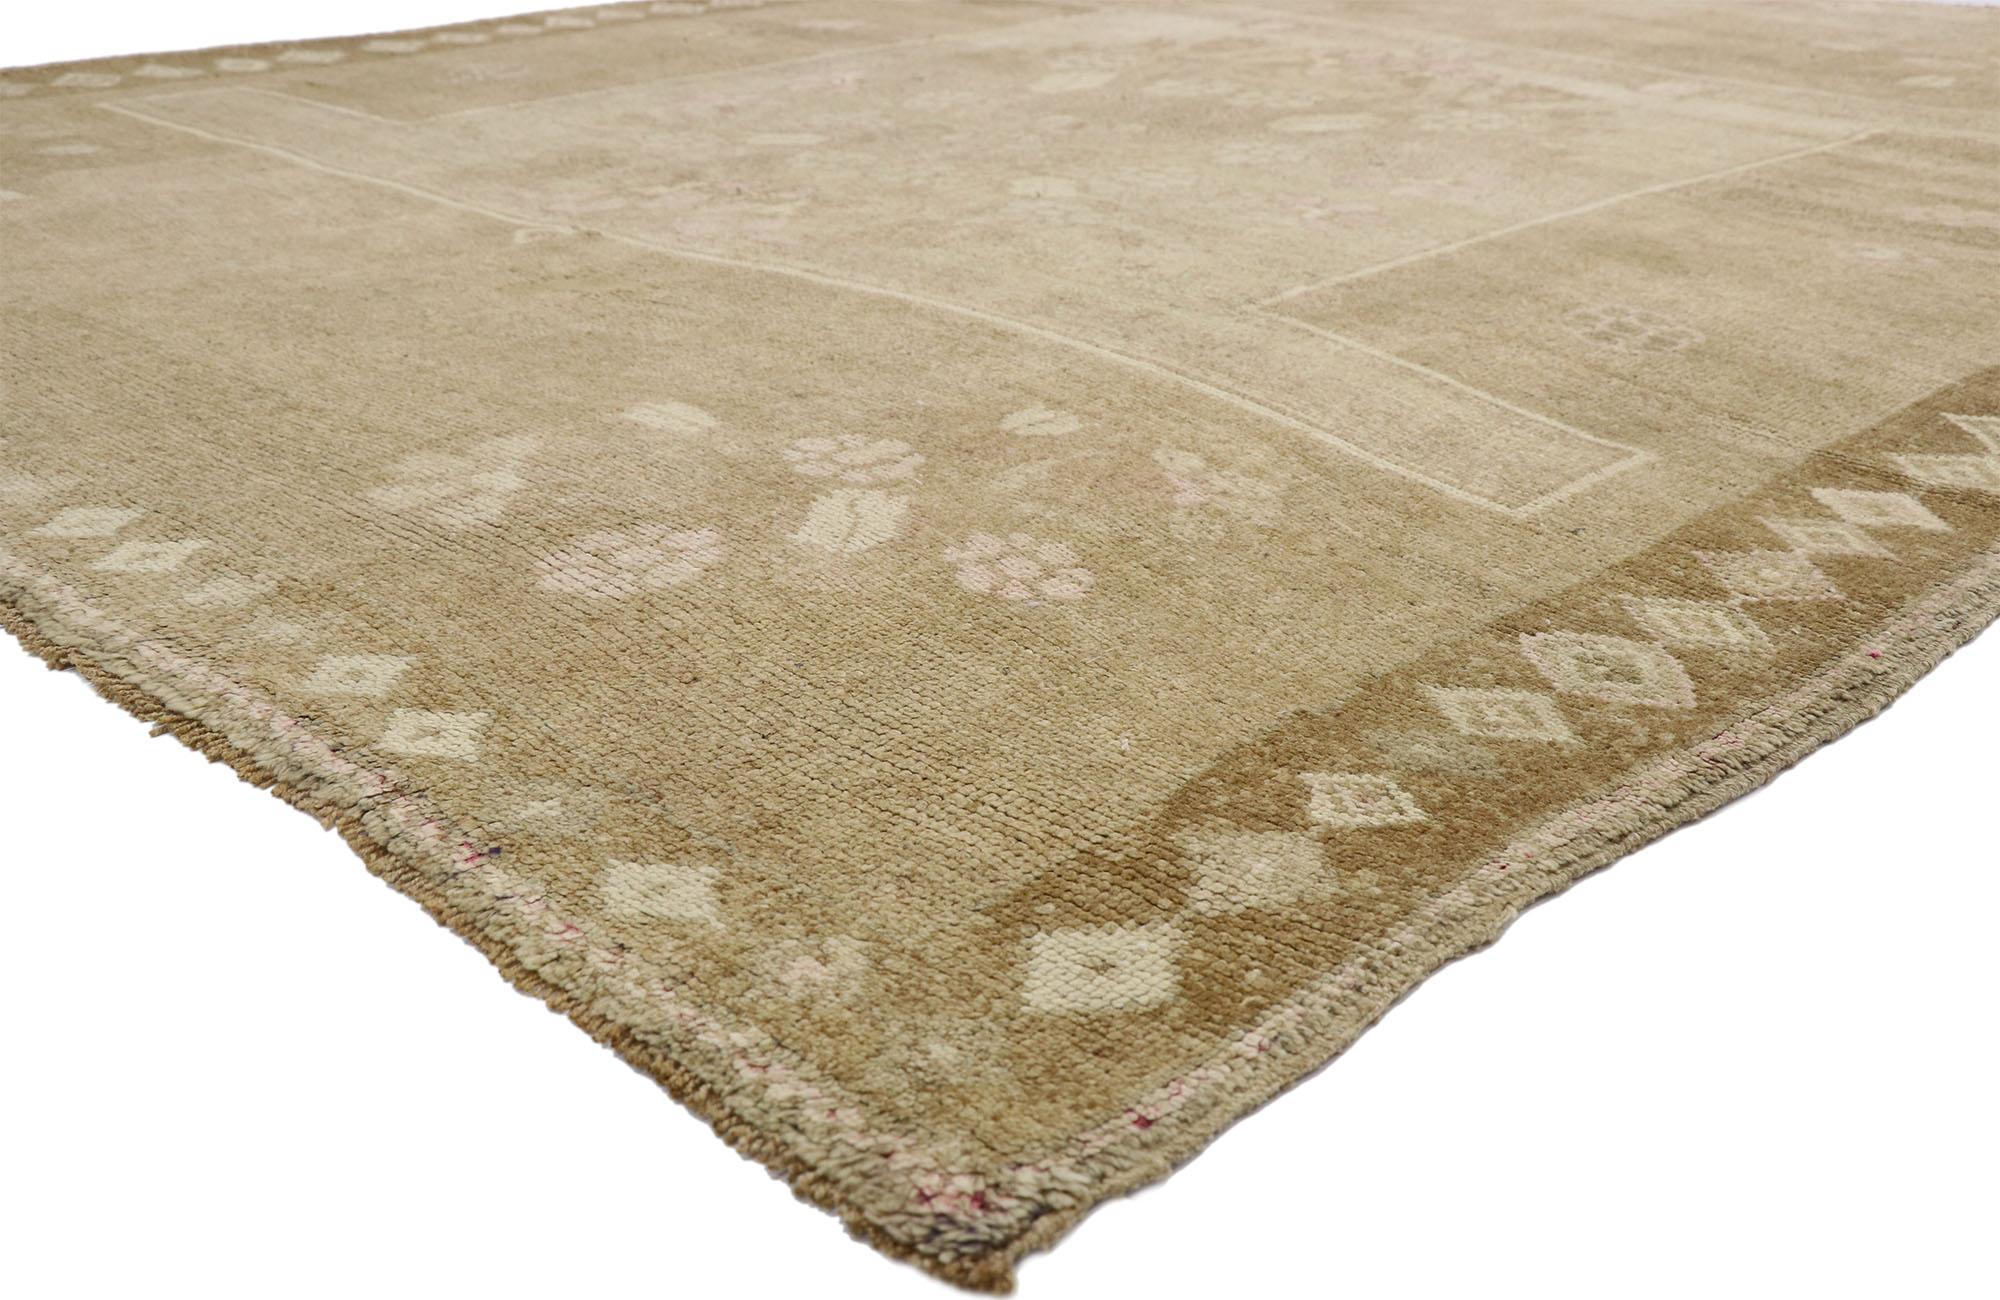 52545, vintage Turkish Kars rug with Modern Farmhouse and Romantic Prairie Style. This hand knotted wool vintage Turkish Kars rug features a large square medallion patterned with a round floral bouquet in an abrashed field. Each corner spandrel is